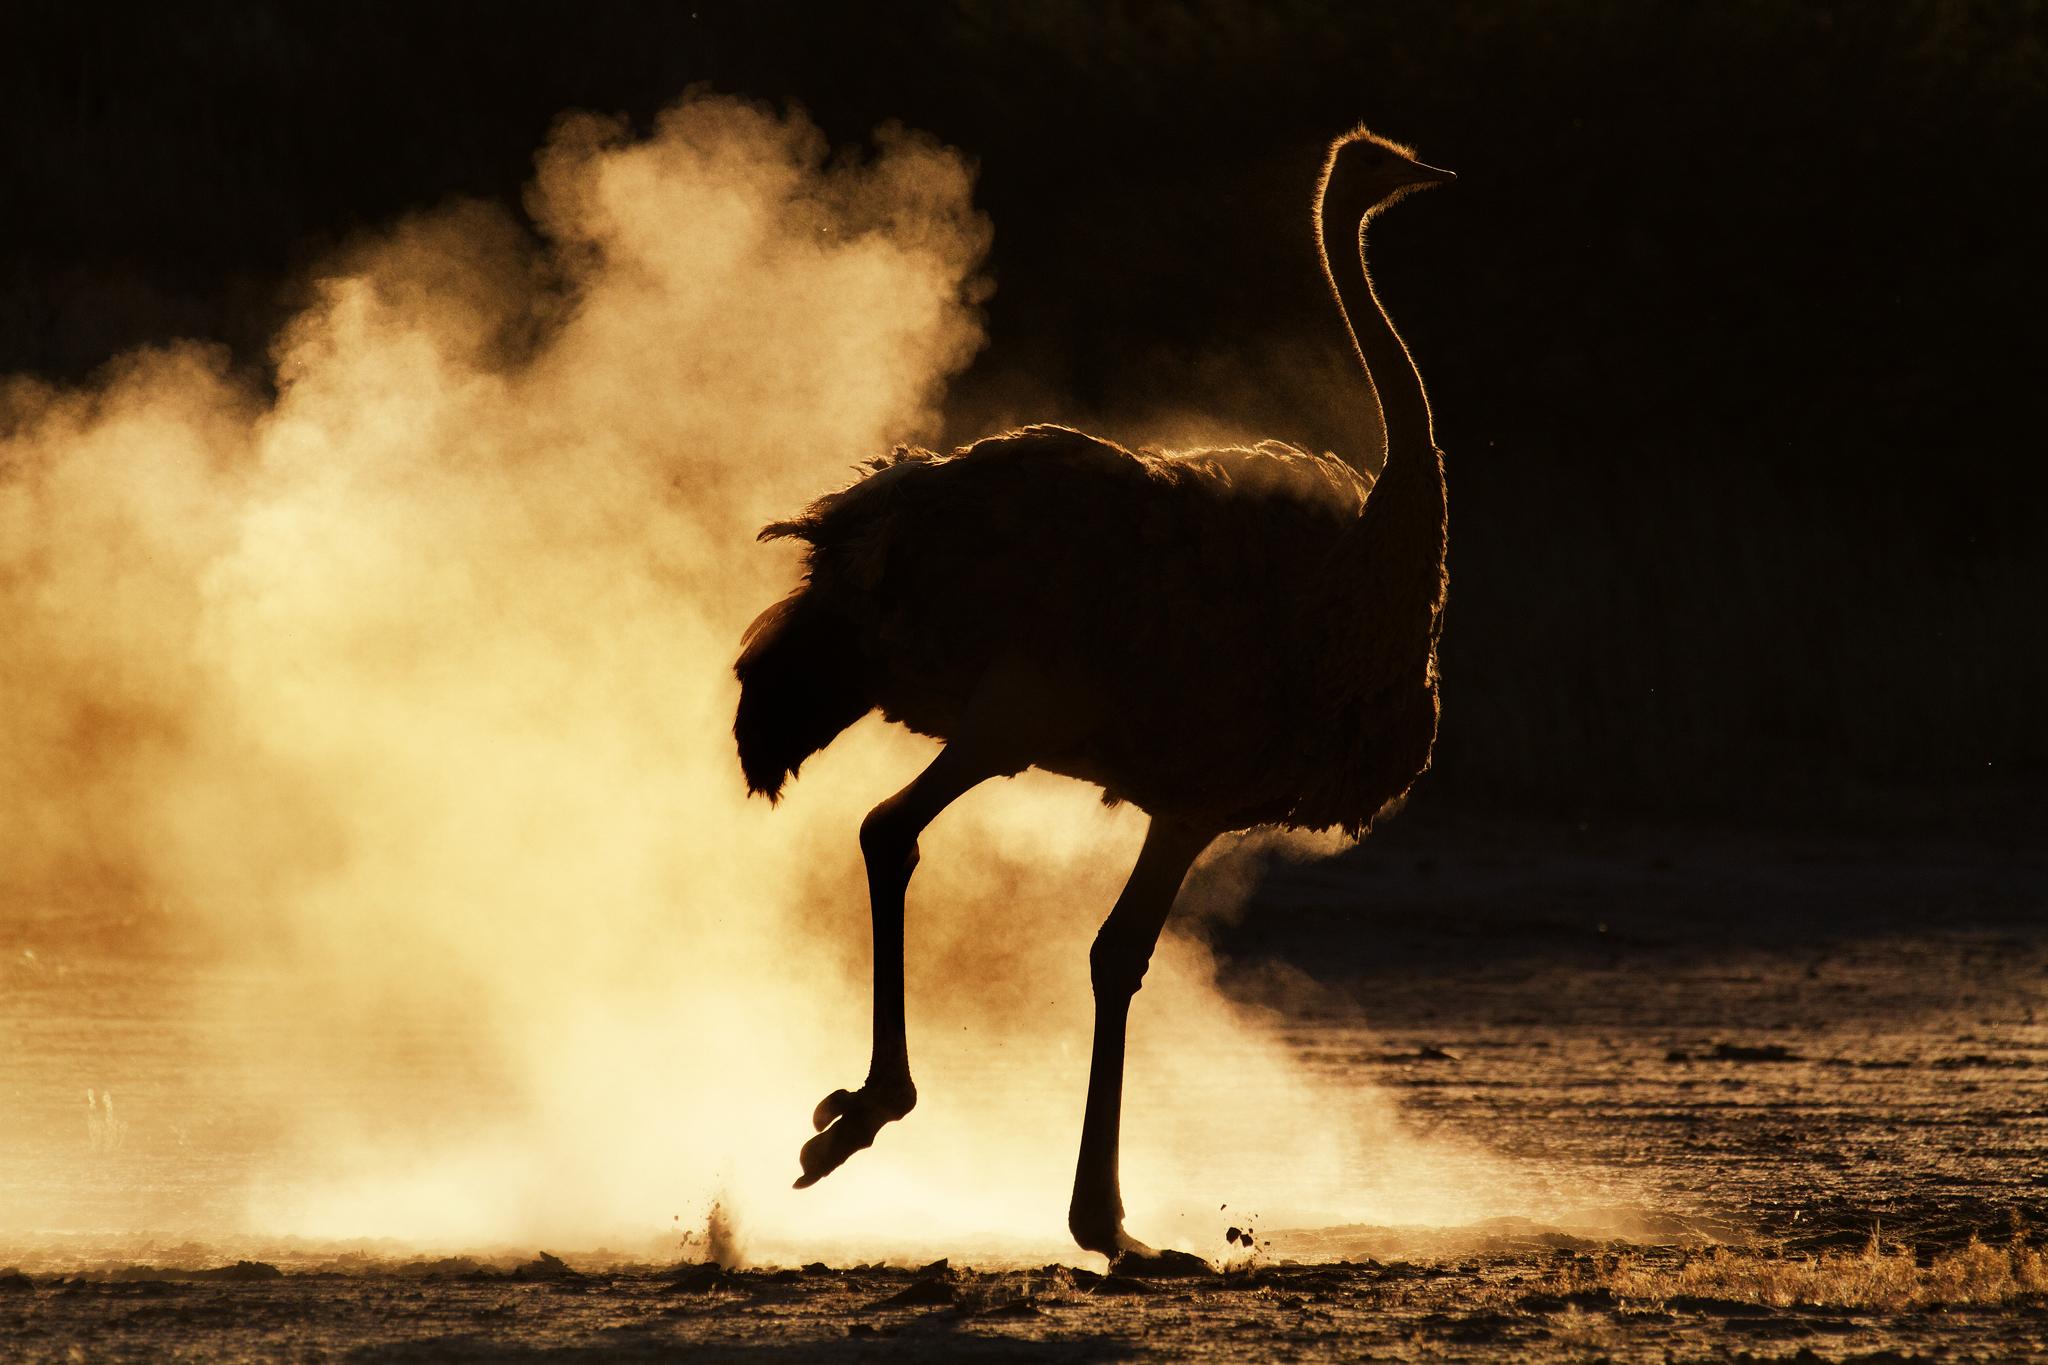 Ostriches show off for the opposite sex – and the cameras